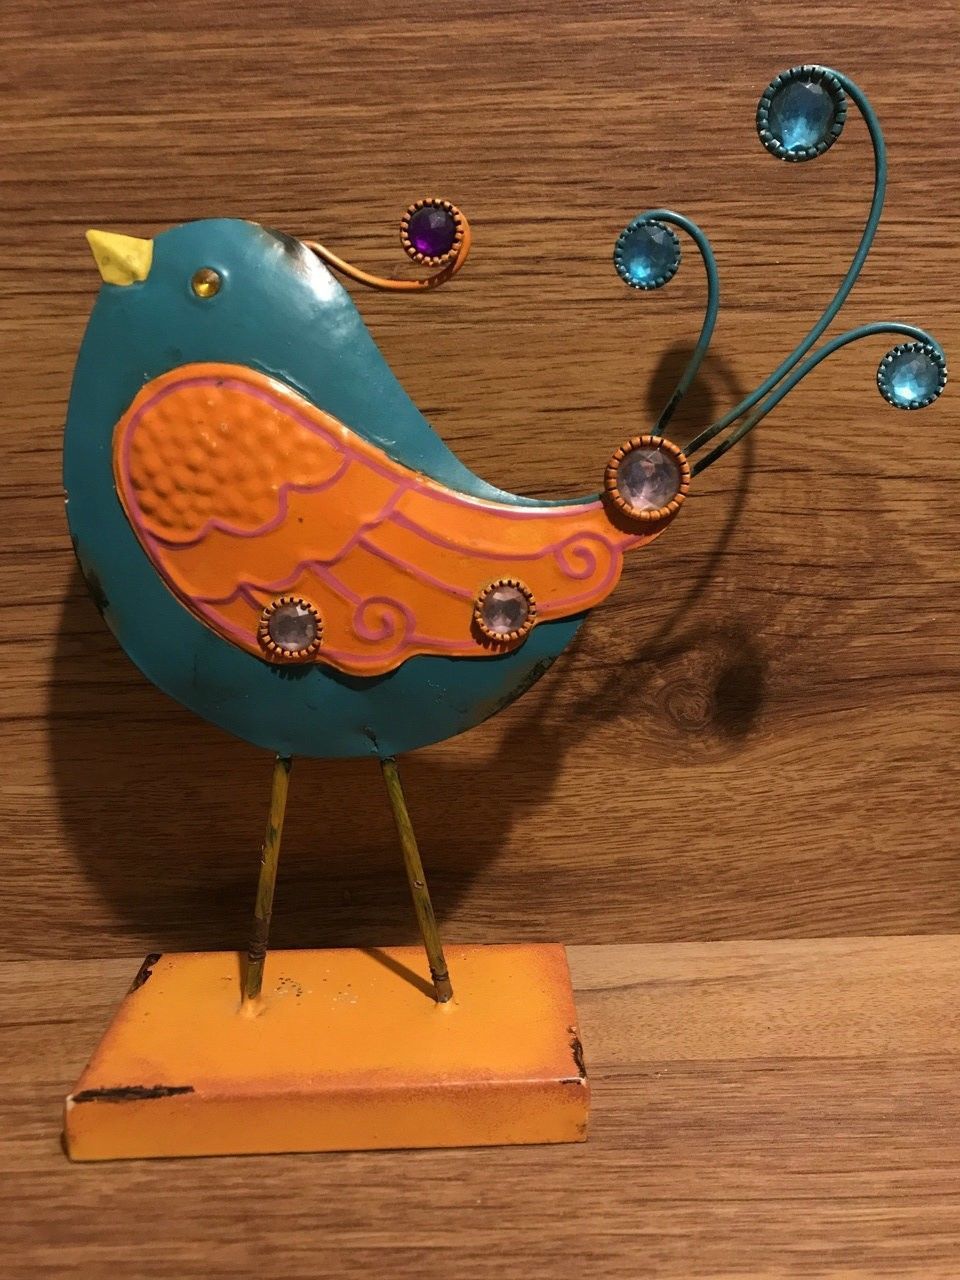 Whimsical, Colorful, Decorative, Jeweled Metal Tin Funky Chick - $20.00